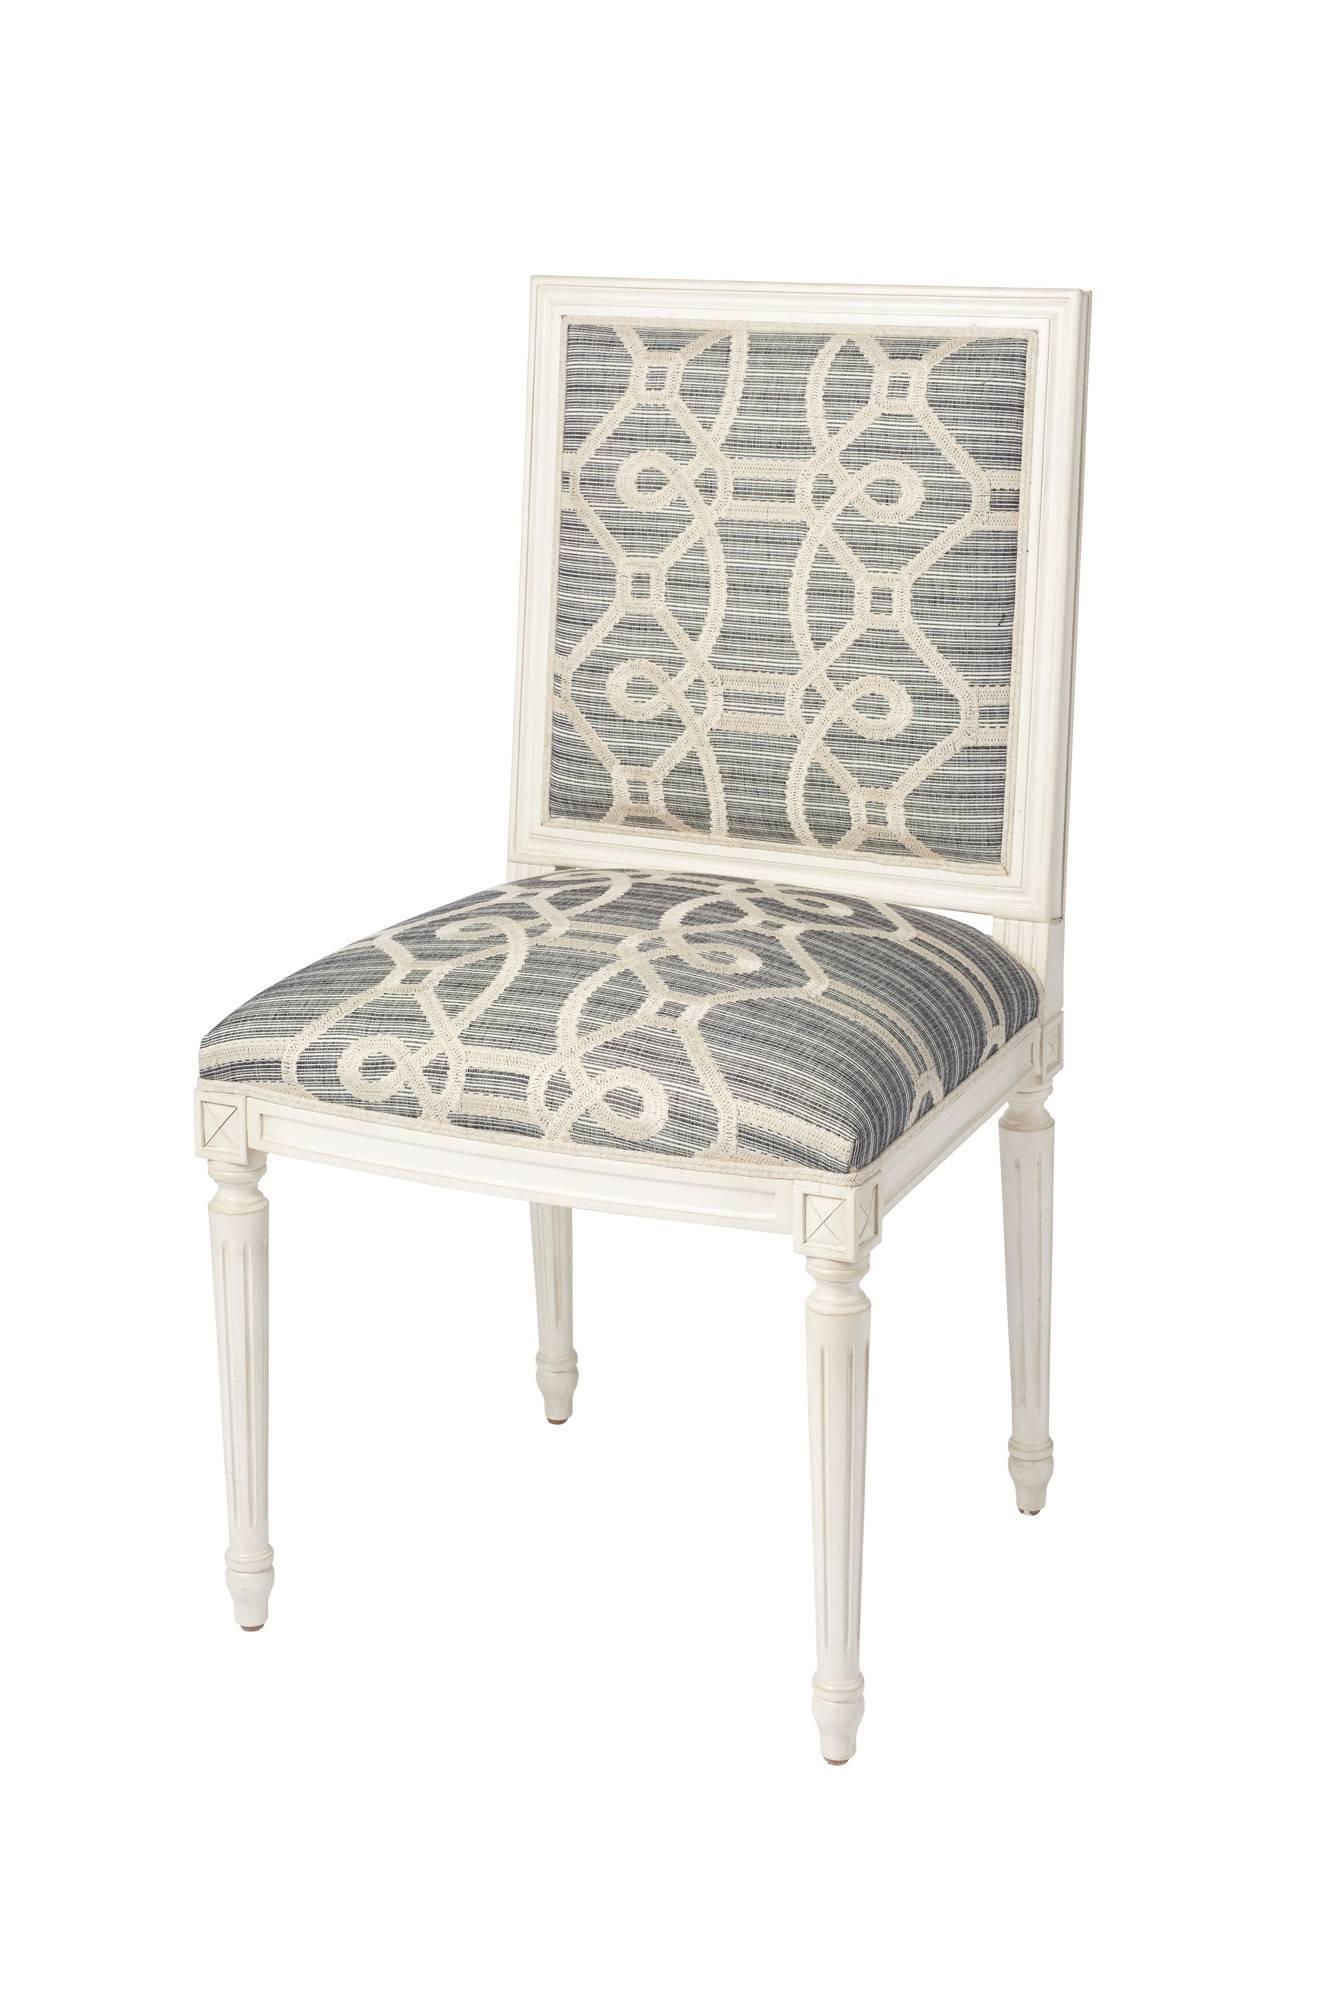 Schumacher Marie Therese Ziz Embroidery Strié Hand-Carved Beechwood Side Chair  3